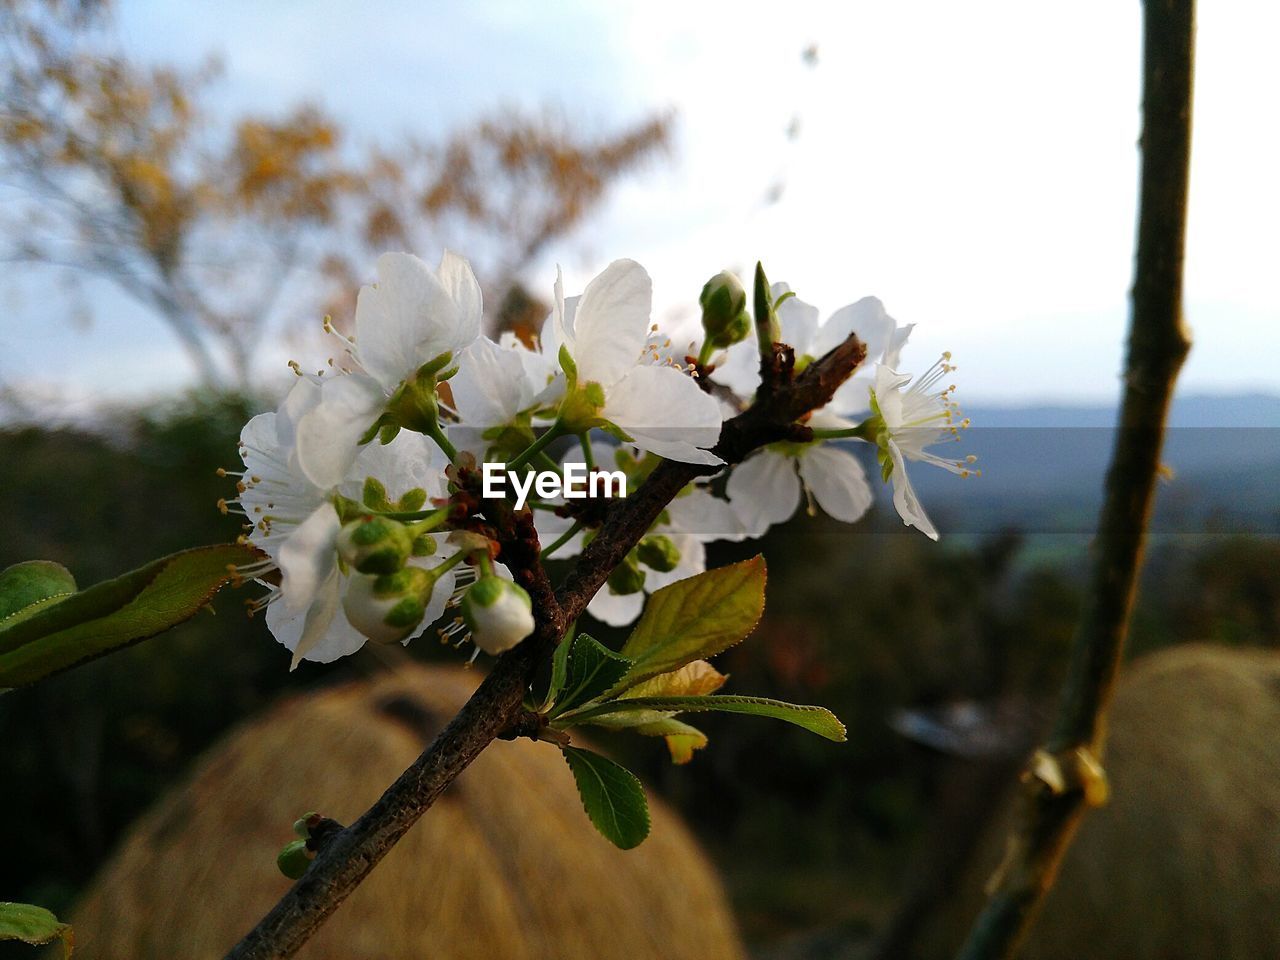 CLOSE-UP OF WHITE FLOWERS ON TREE BRANCH